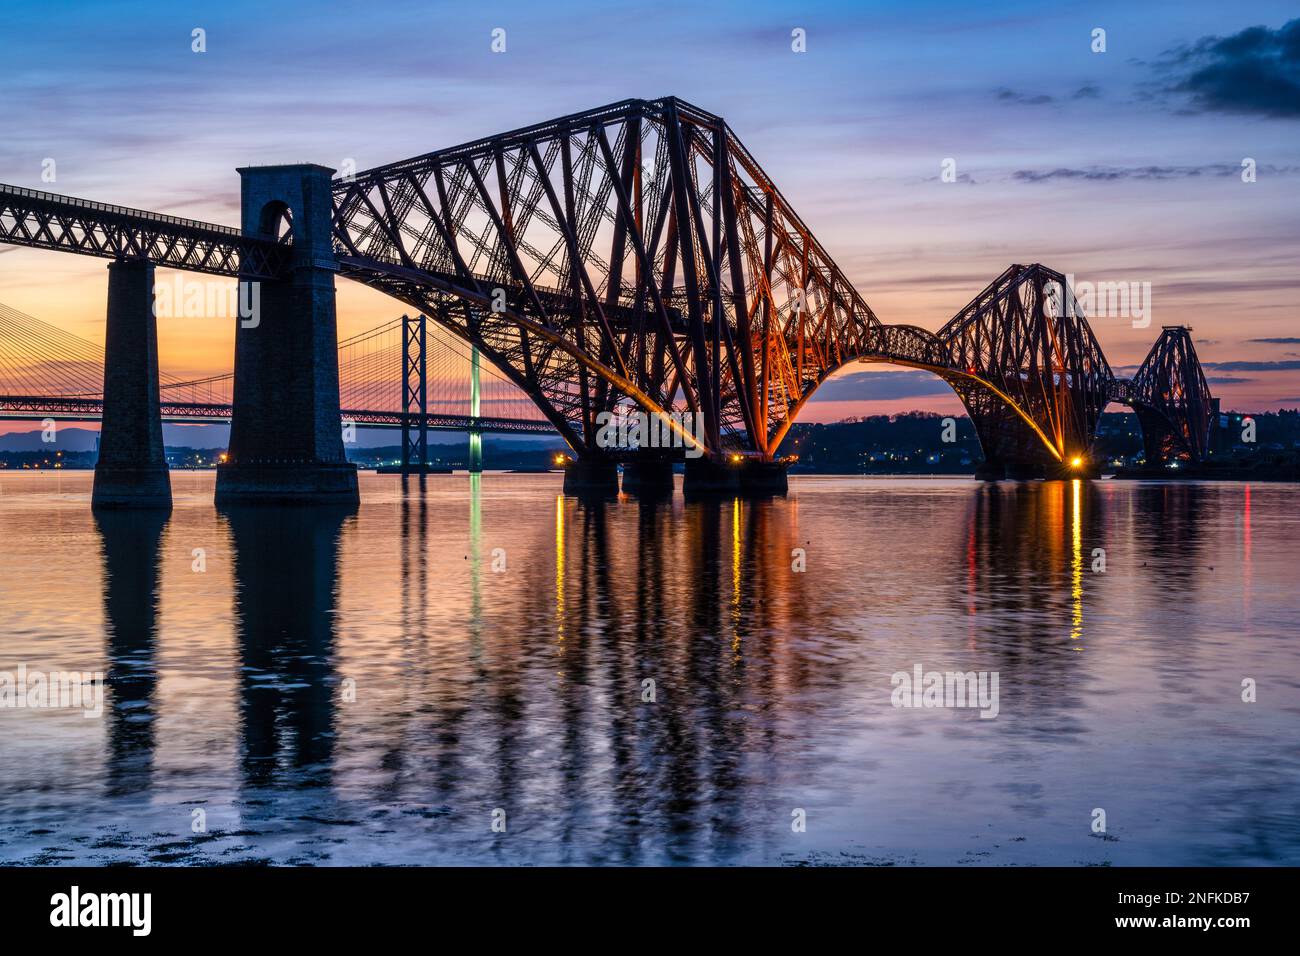 Illuminated Forth Rail Bridge at dusk, with Forth Road Bridge and Queensferry Crossing beyond, from South Queensferry, Scotland, UK Stock Photo